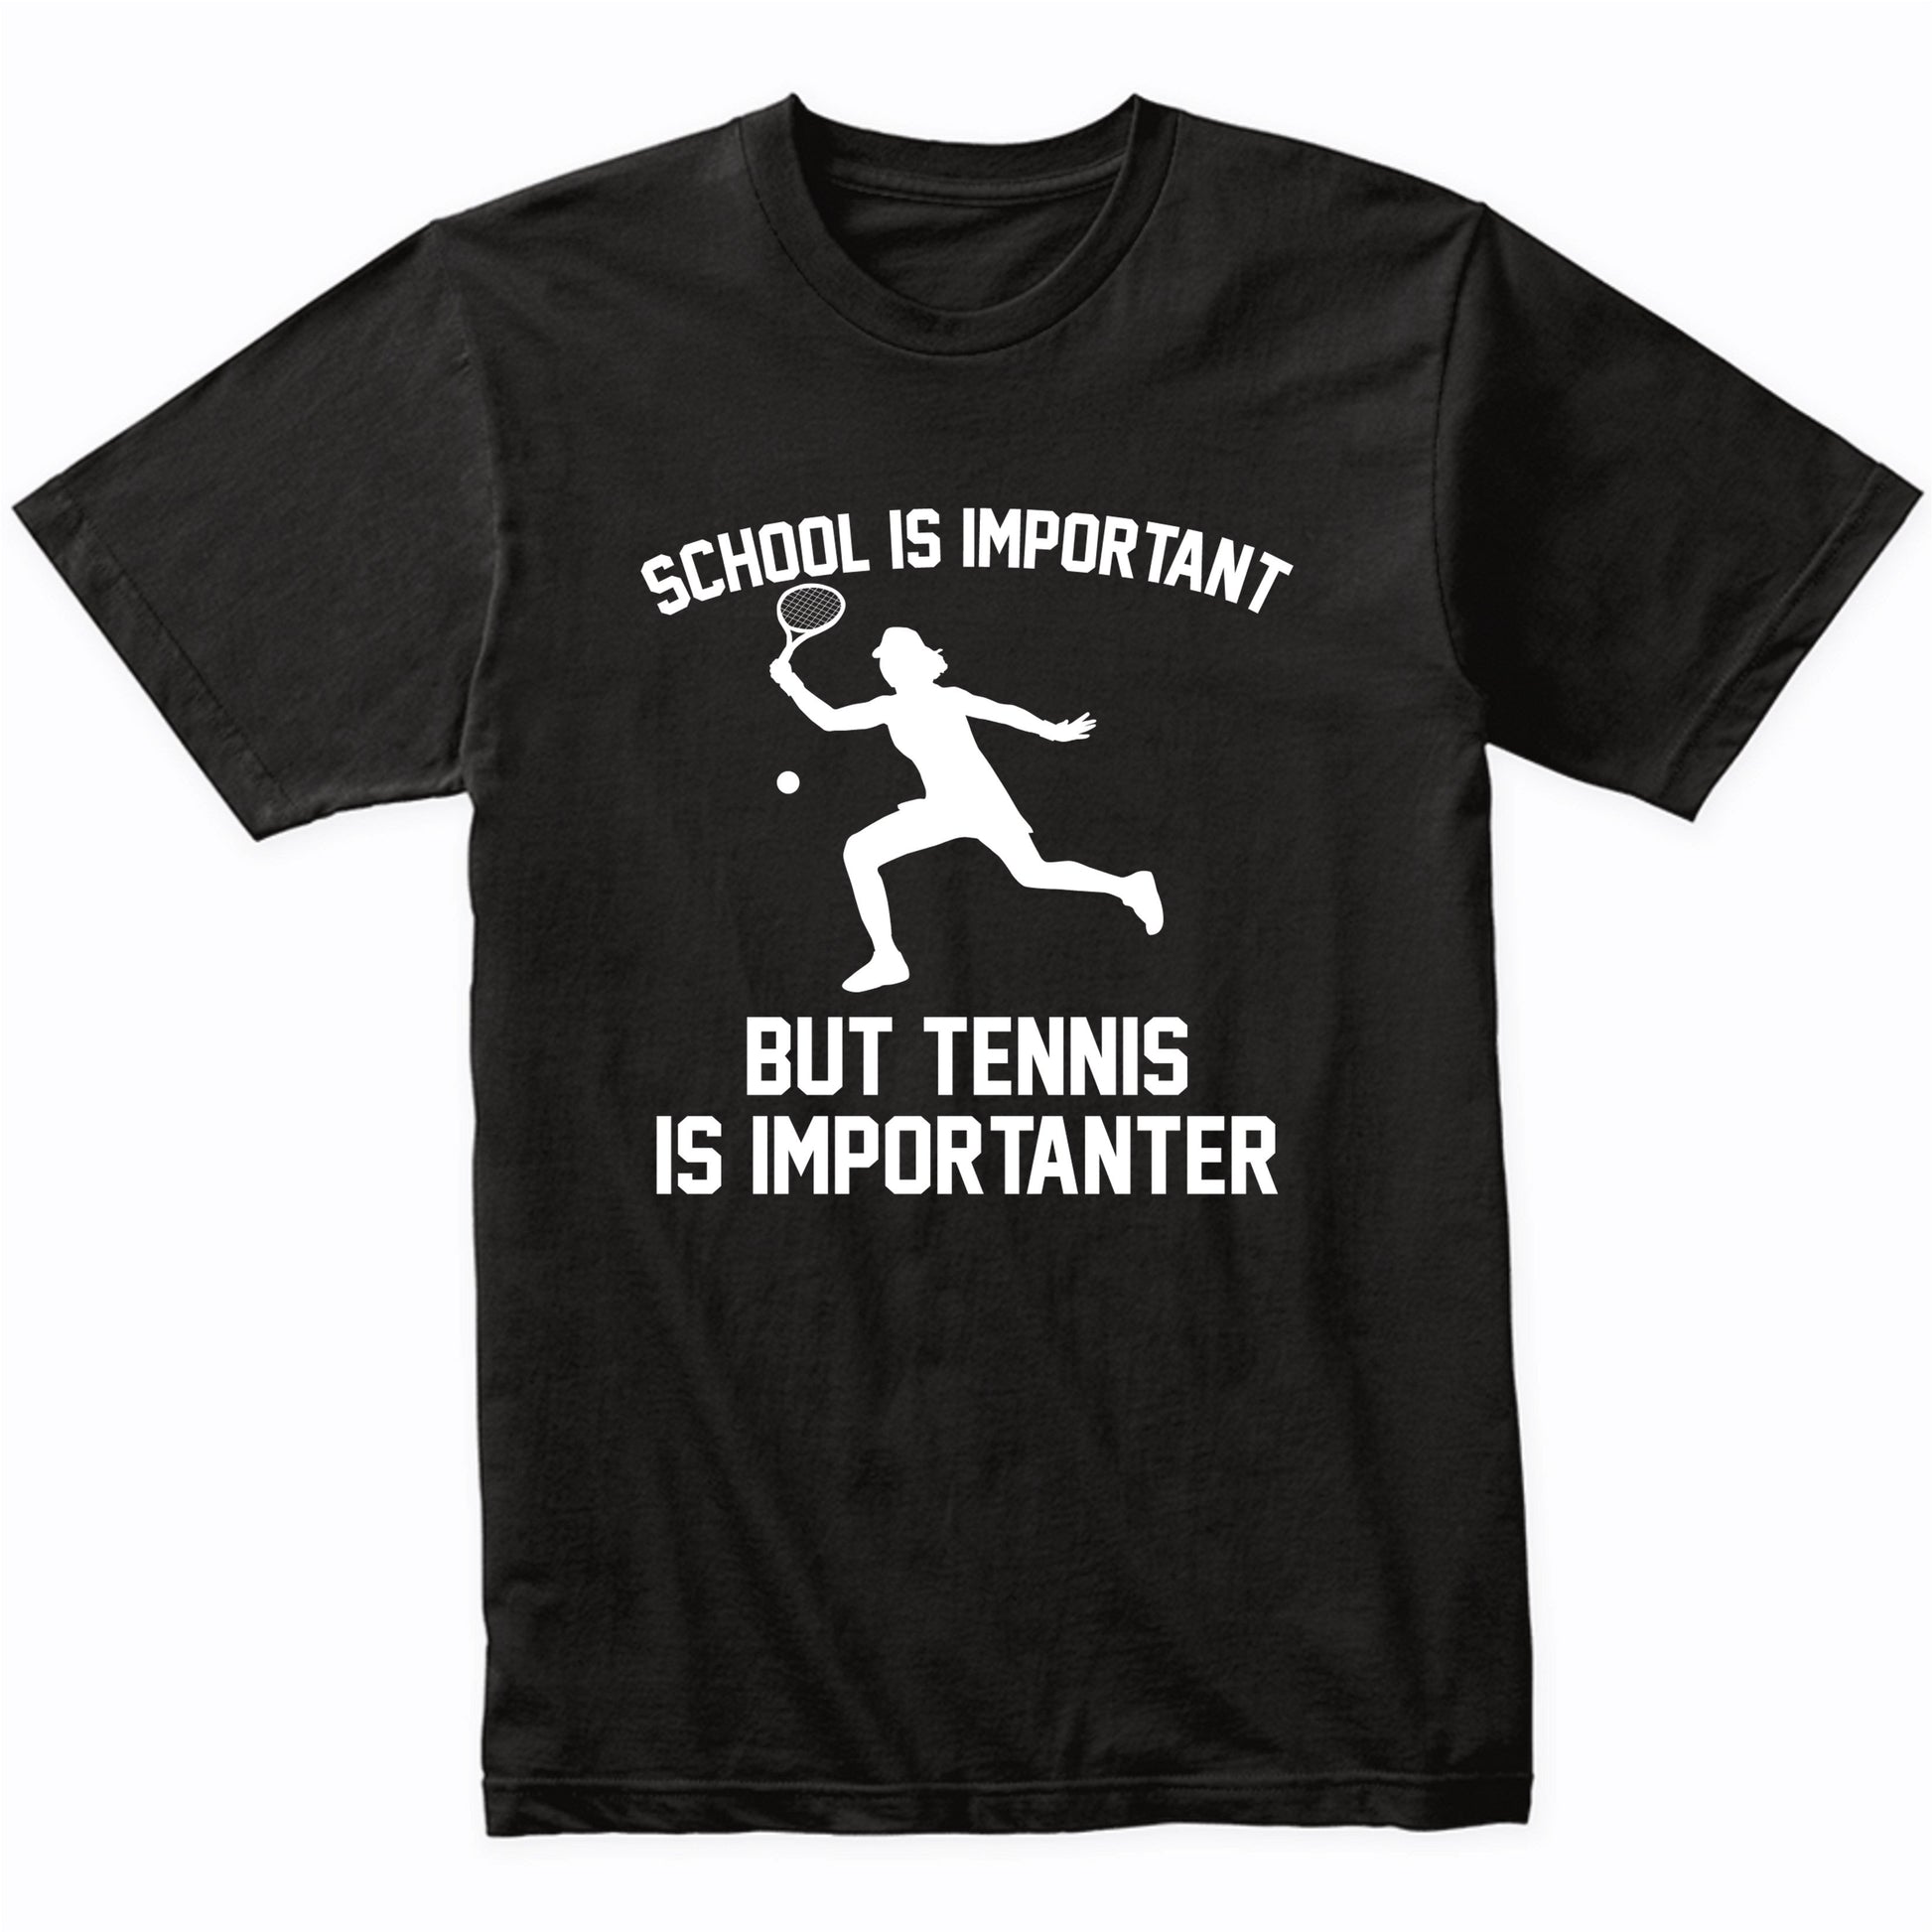 School Is Important But Tennis Is Importanter Funny Shirt